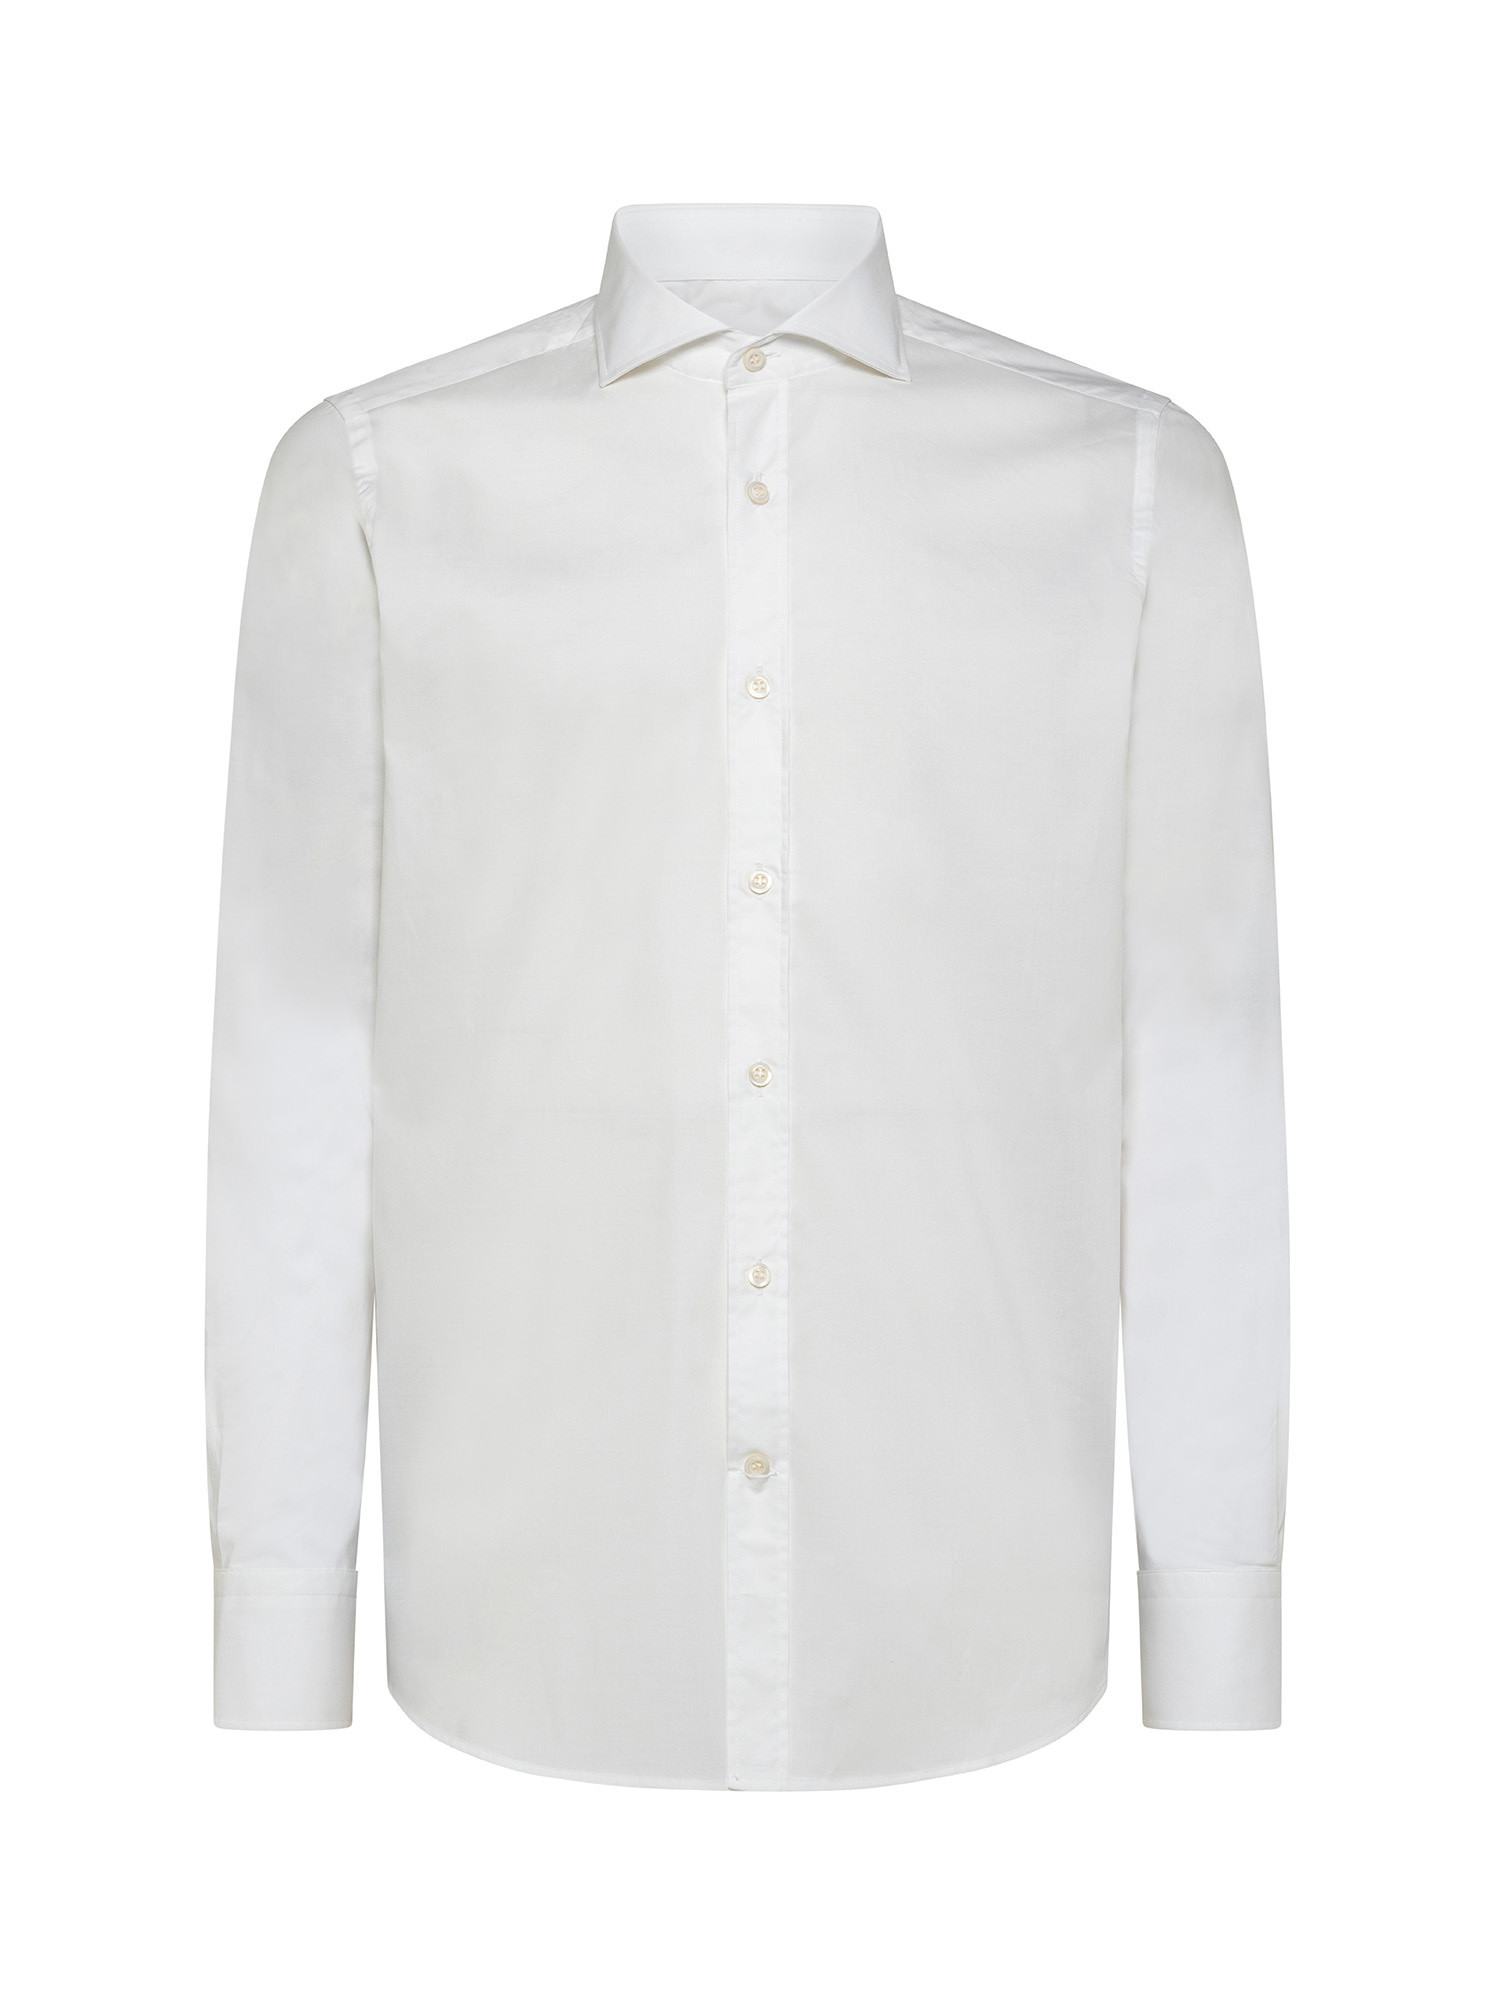 Slim fit shirt in stretch cotton, White, large image number 1